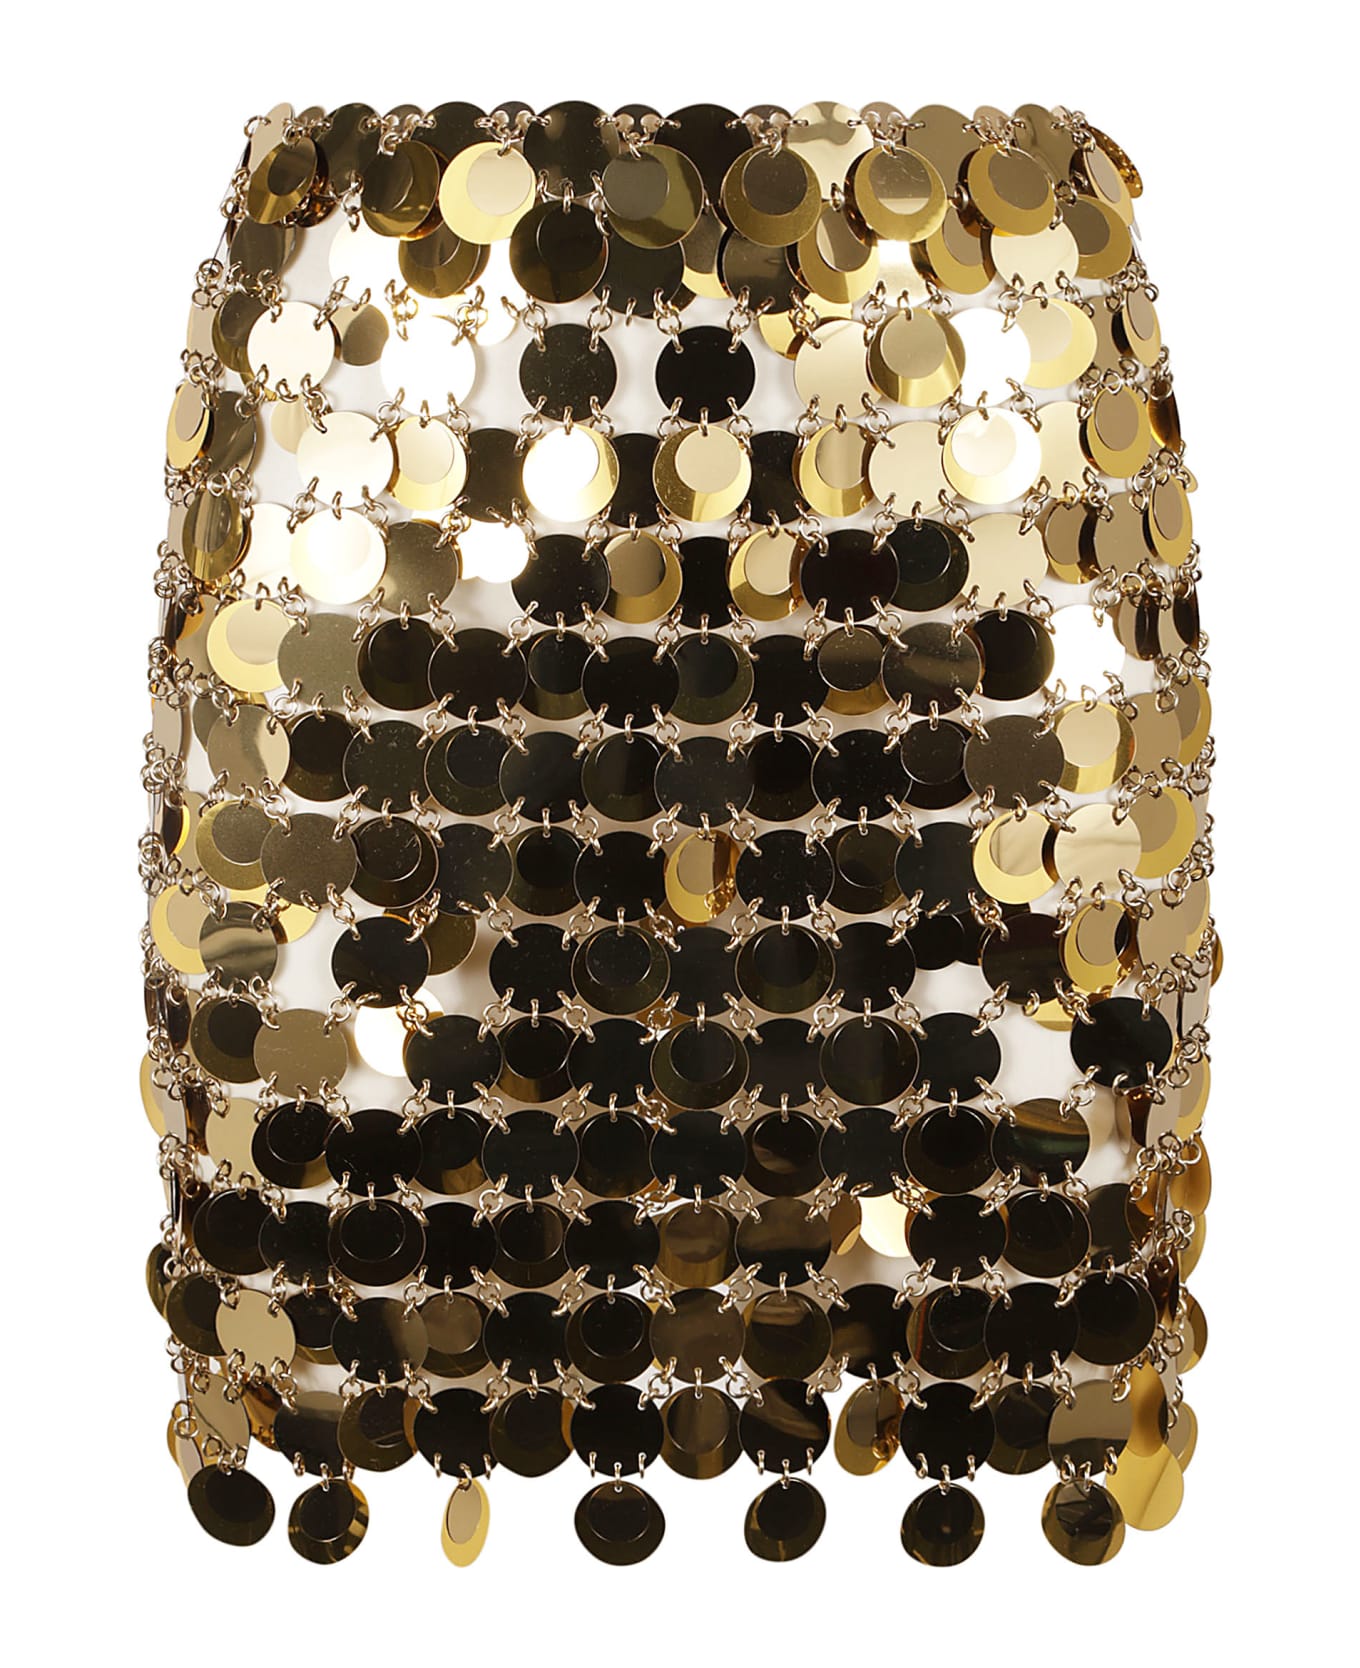 Paco Rabanne Mini Skirt With Golden Mirror Effect Discs - Gold